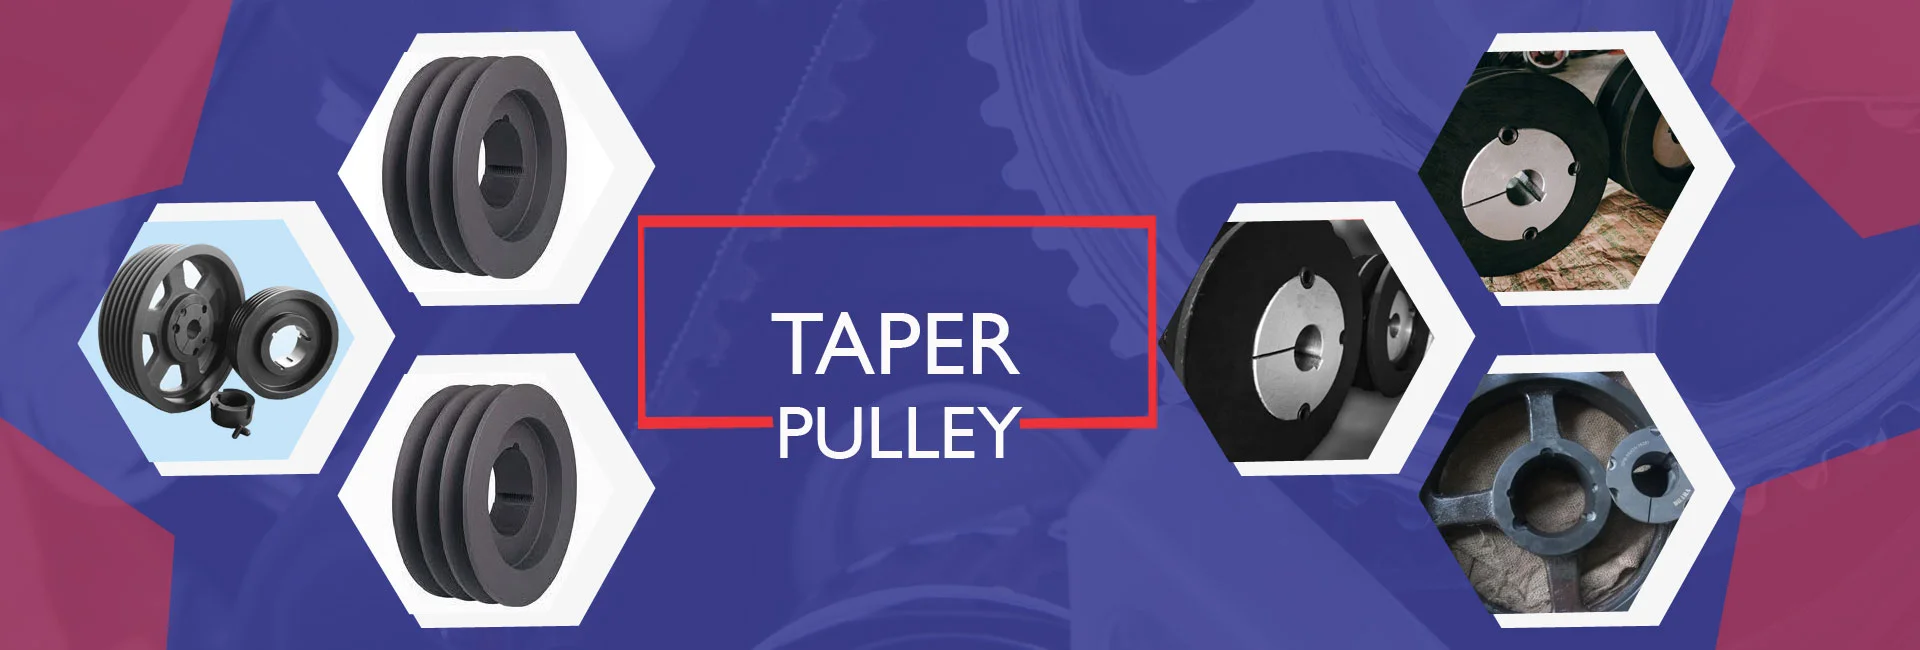 Taper Pulley Manufatcurer in Malaysia